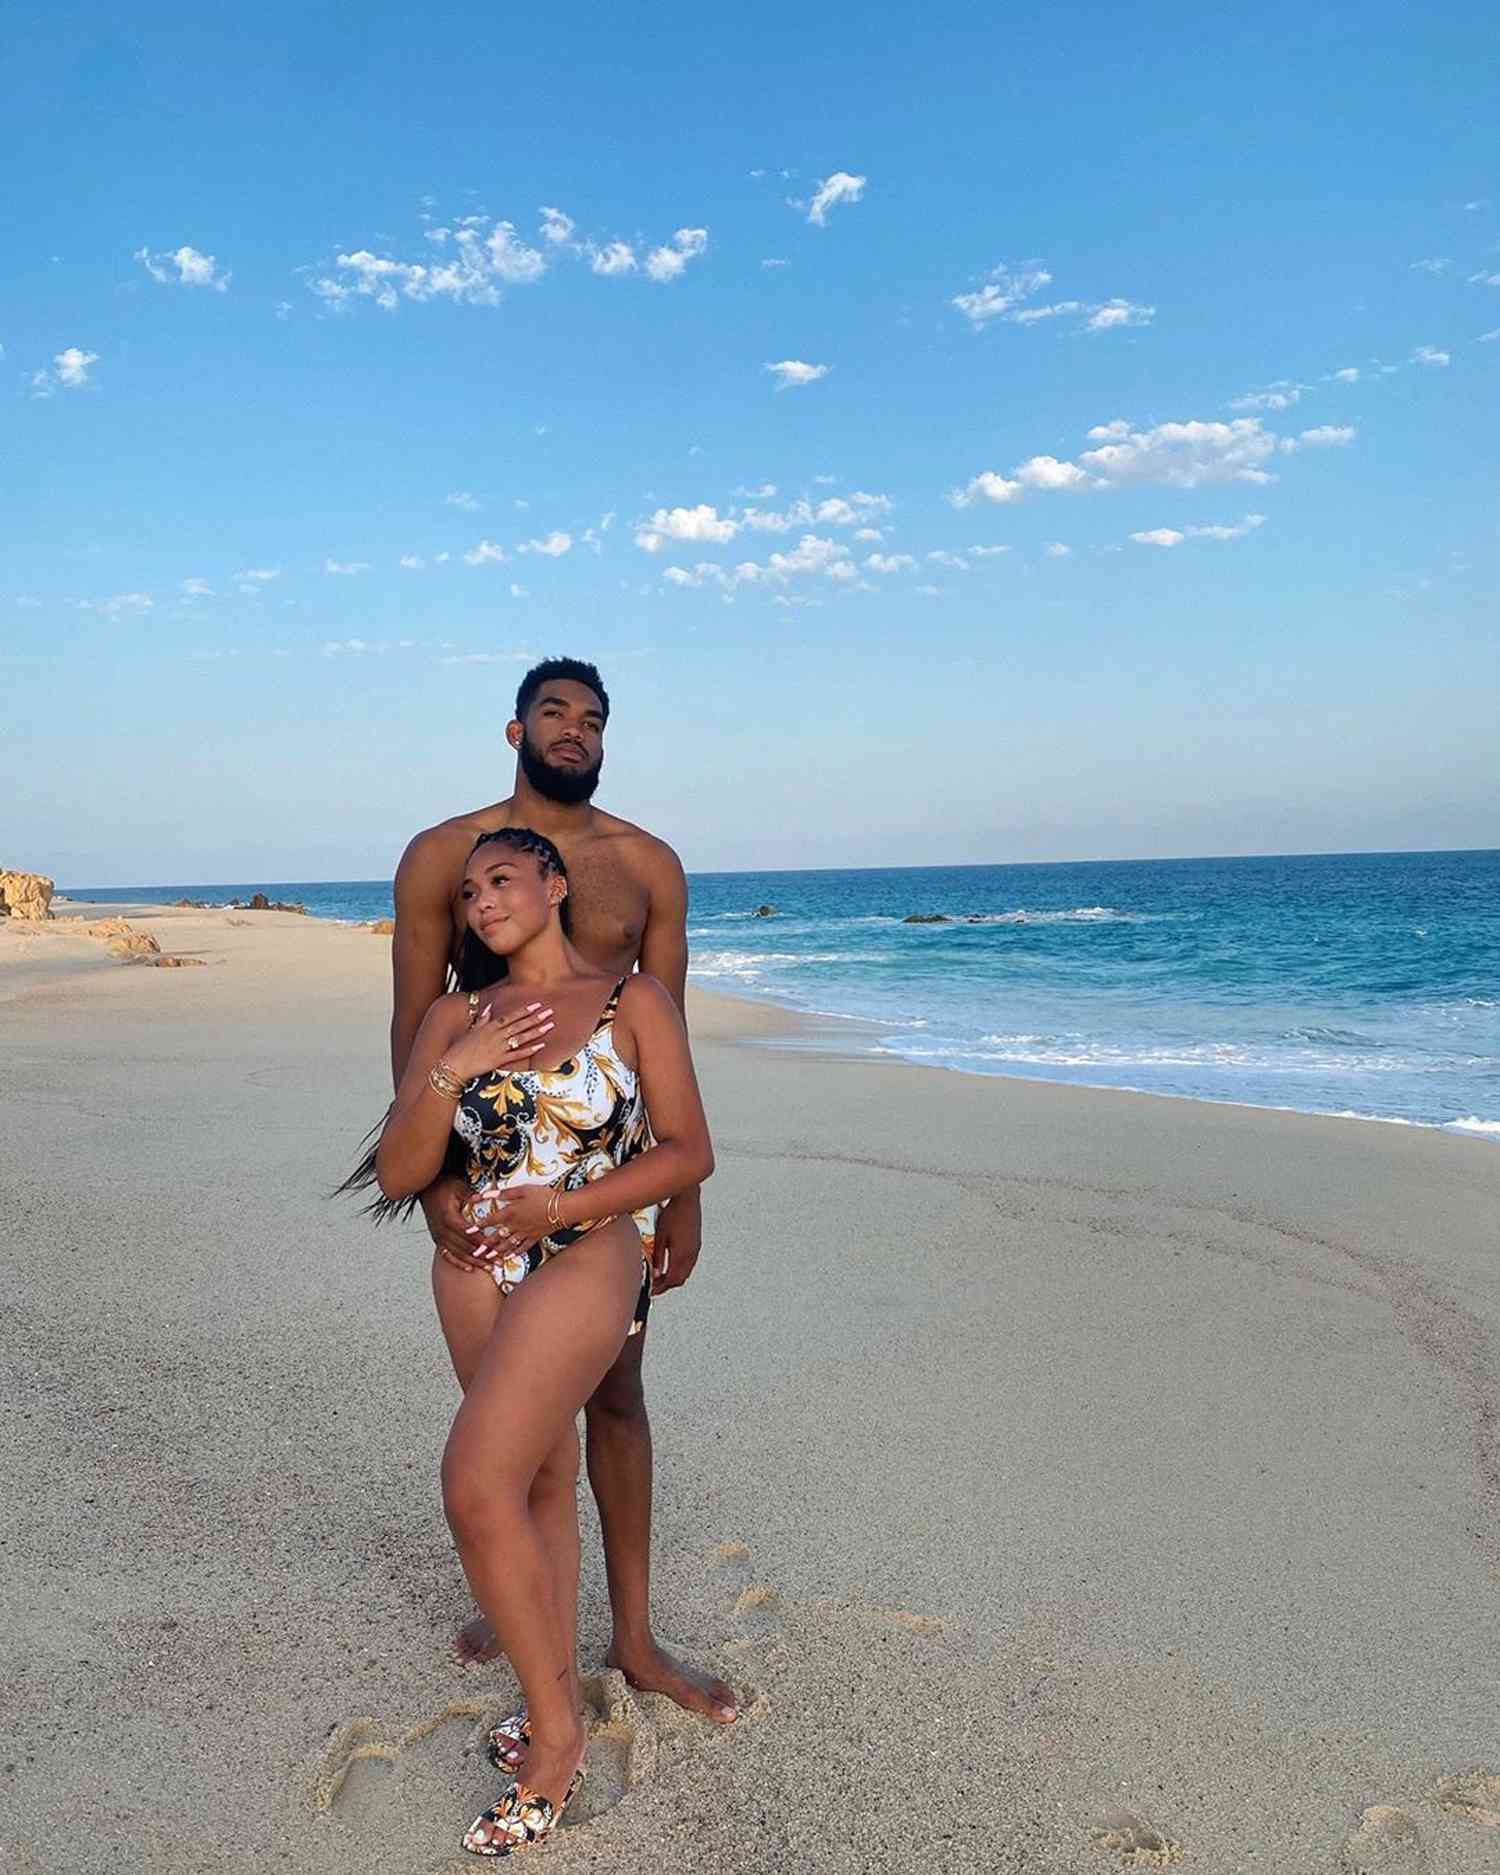 Jordyn Woods Says She and Boyfriend Karl-Anthony Towns 'Connected About Losing a Parent' - PEOPLE